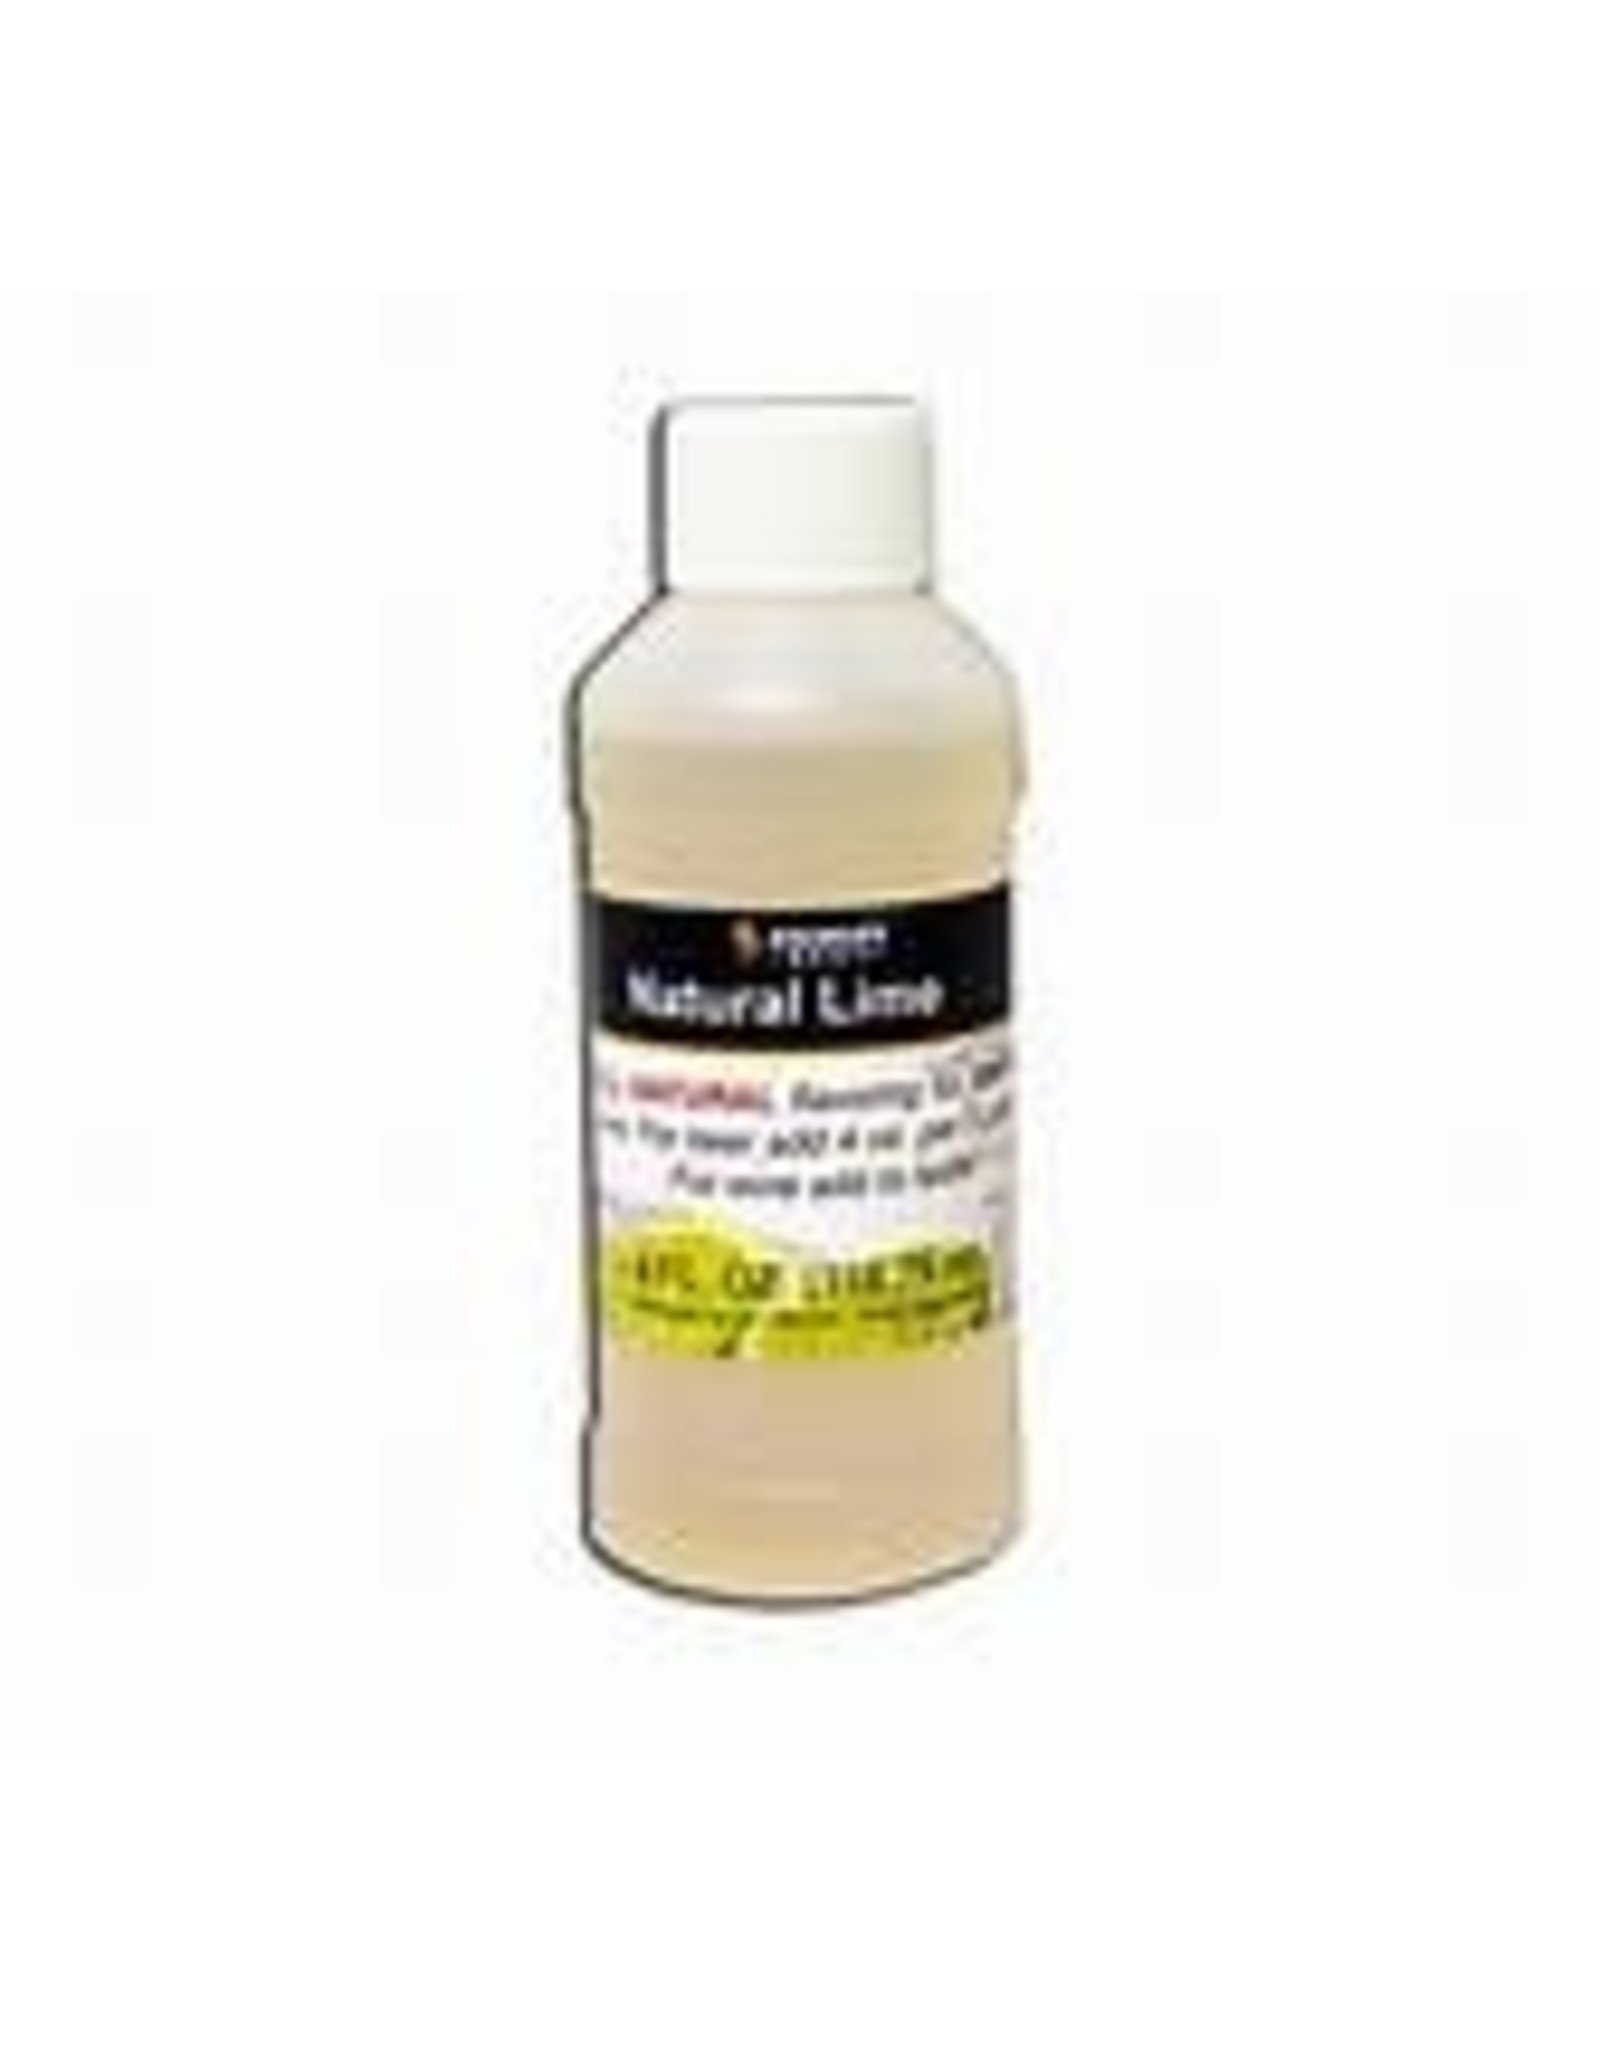 Brewer's Best All natural extract 4 oz Lime